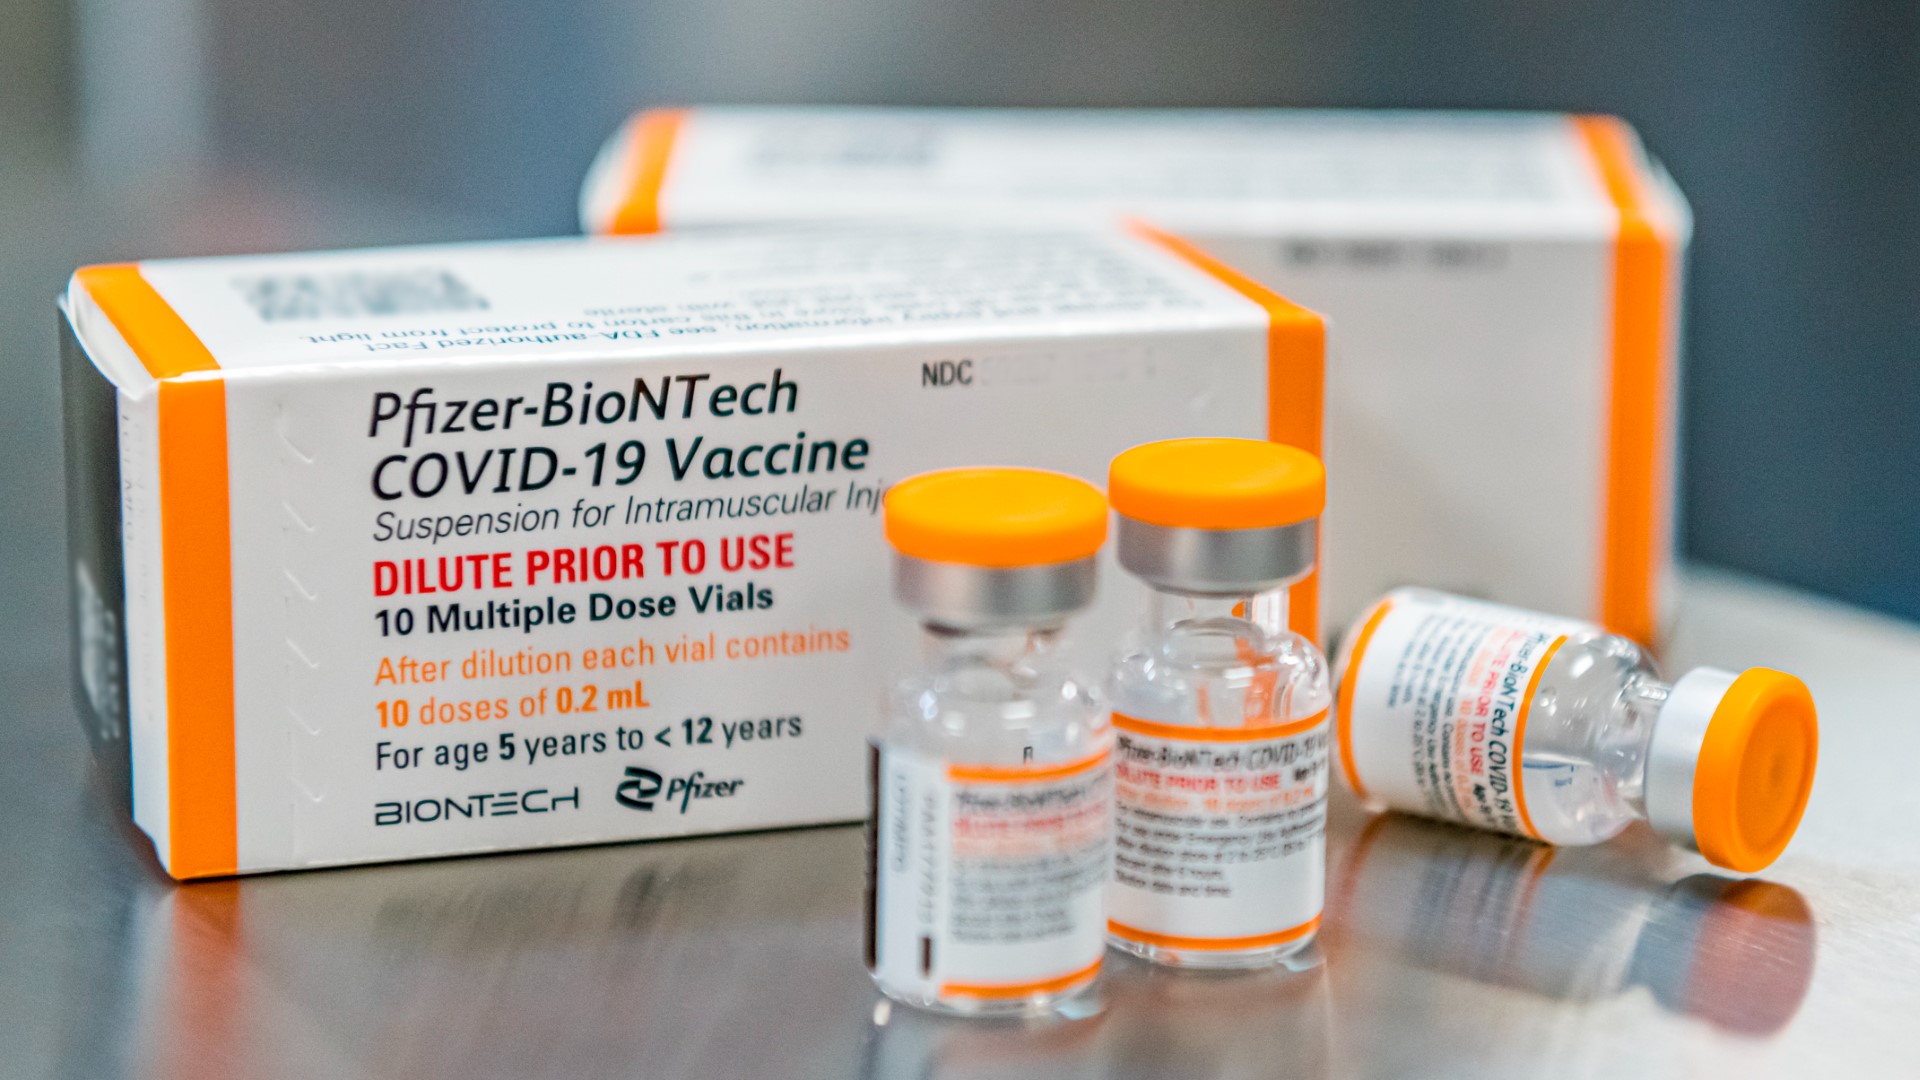 On Tuesday, a CDC panel voted to authorize the Pfizer BioNTech vaccine for the 5-11 age group.